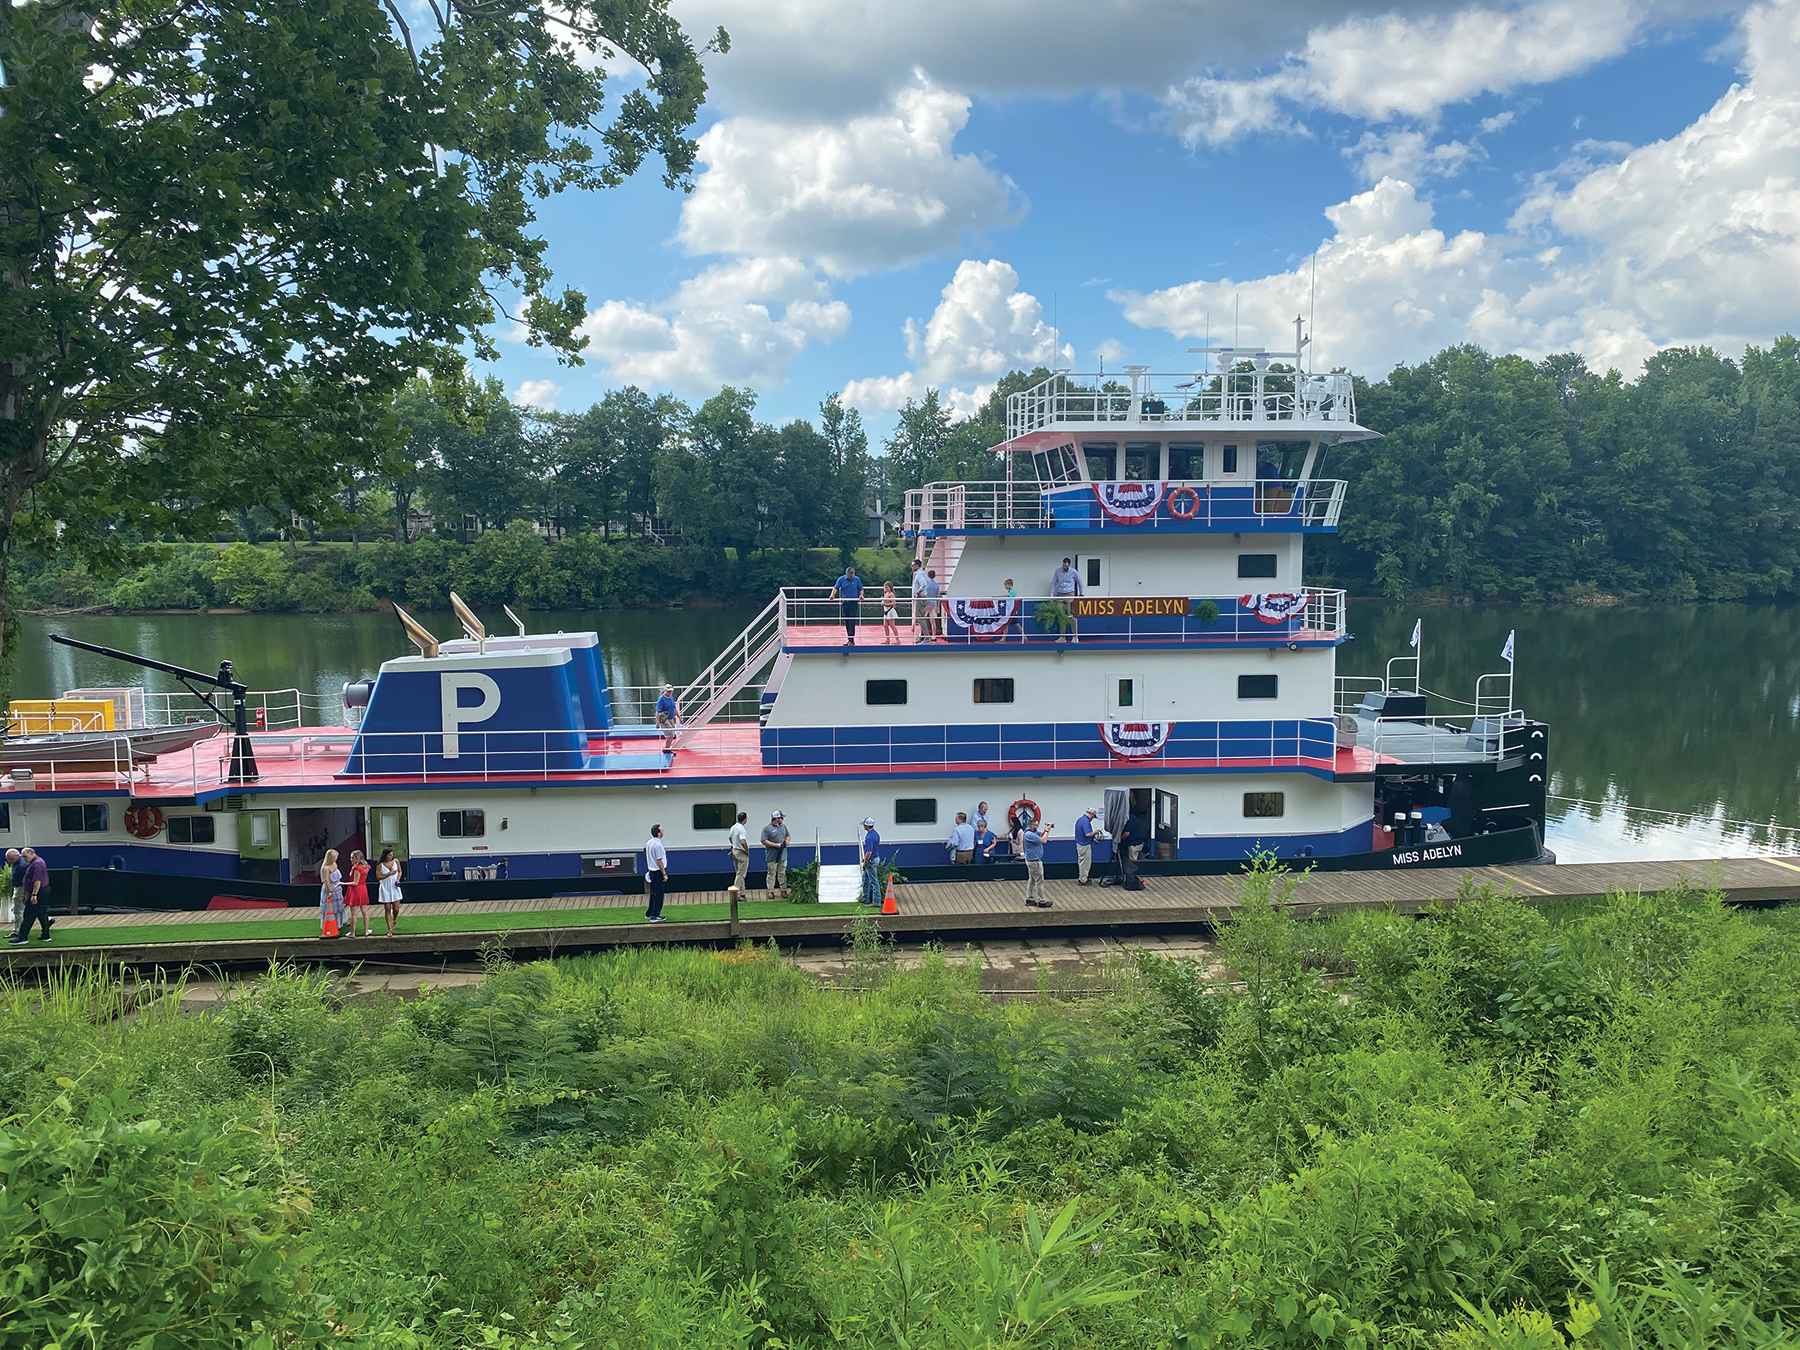 Parker Towing Company’s newest towboat, the mv. Miss Adelyn, is moored on the left descending bank in Tuscaloosa, Ala., near the city’s Riverwalk. (Photo by Cheryl Wray)